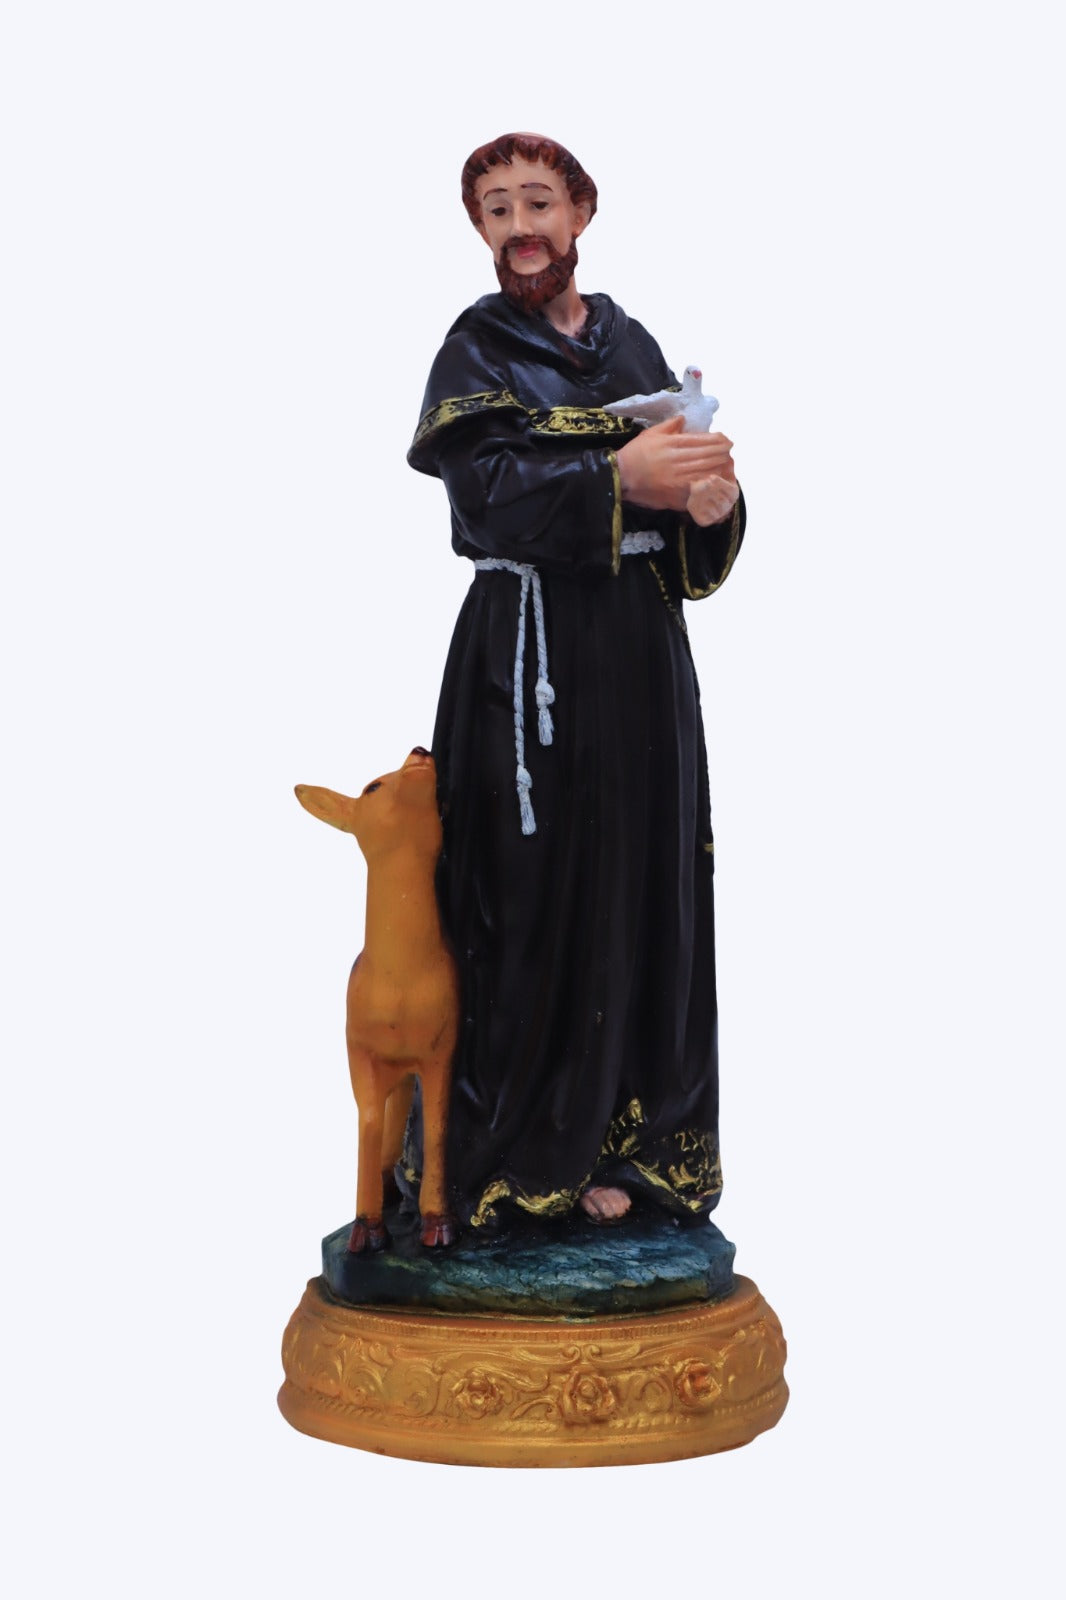 St. Francis of Assisi Statue - 12 Inch | Poly Marble Material | Living Words